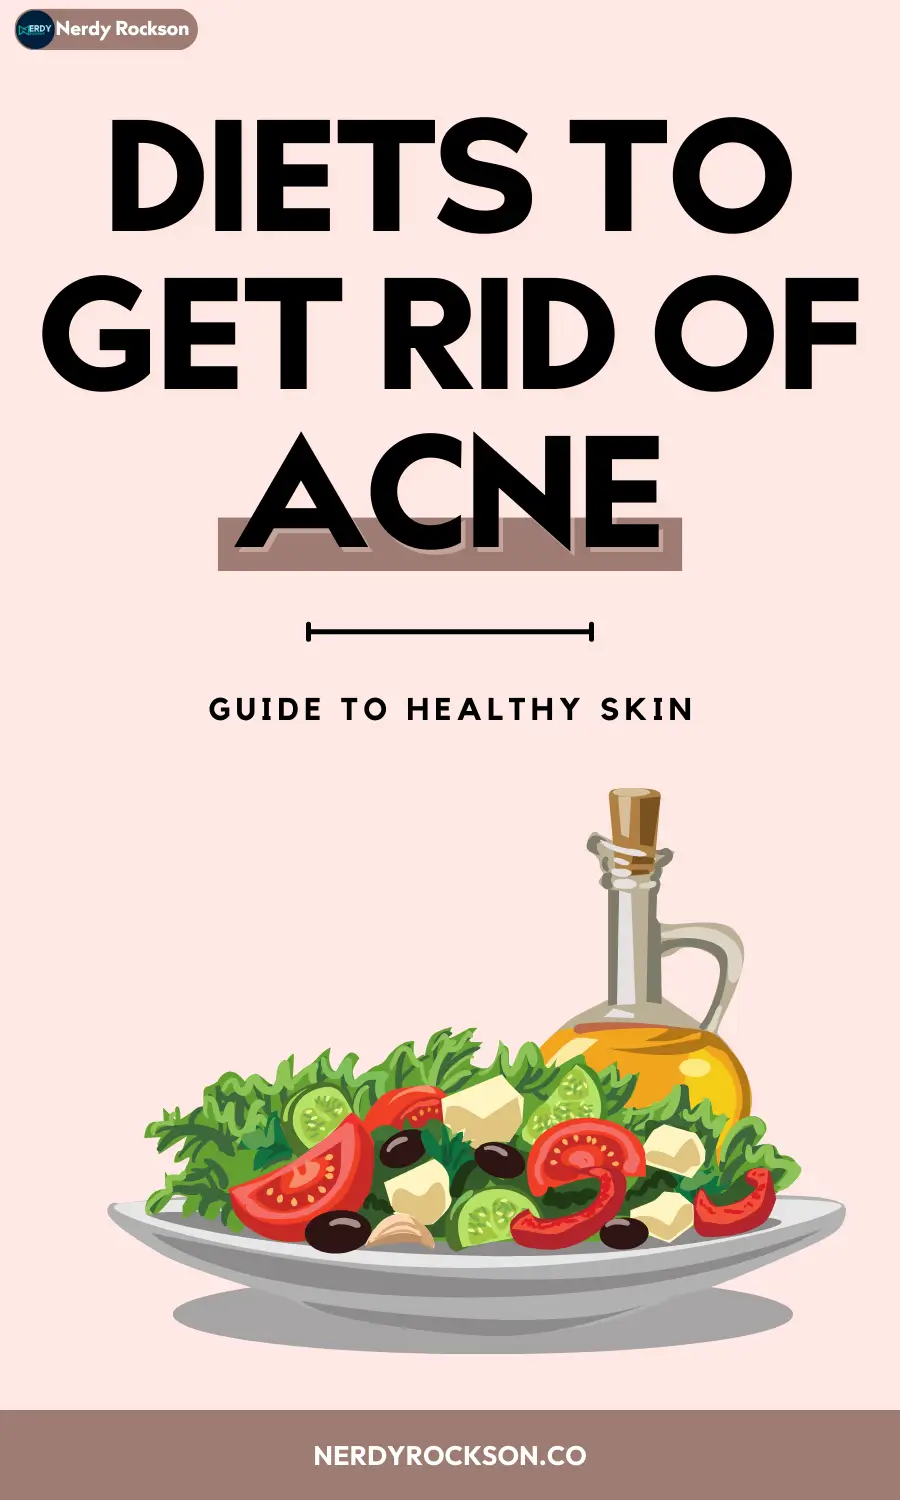 7 Effective Diets To Get Rid Of Acne